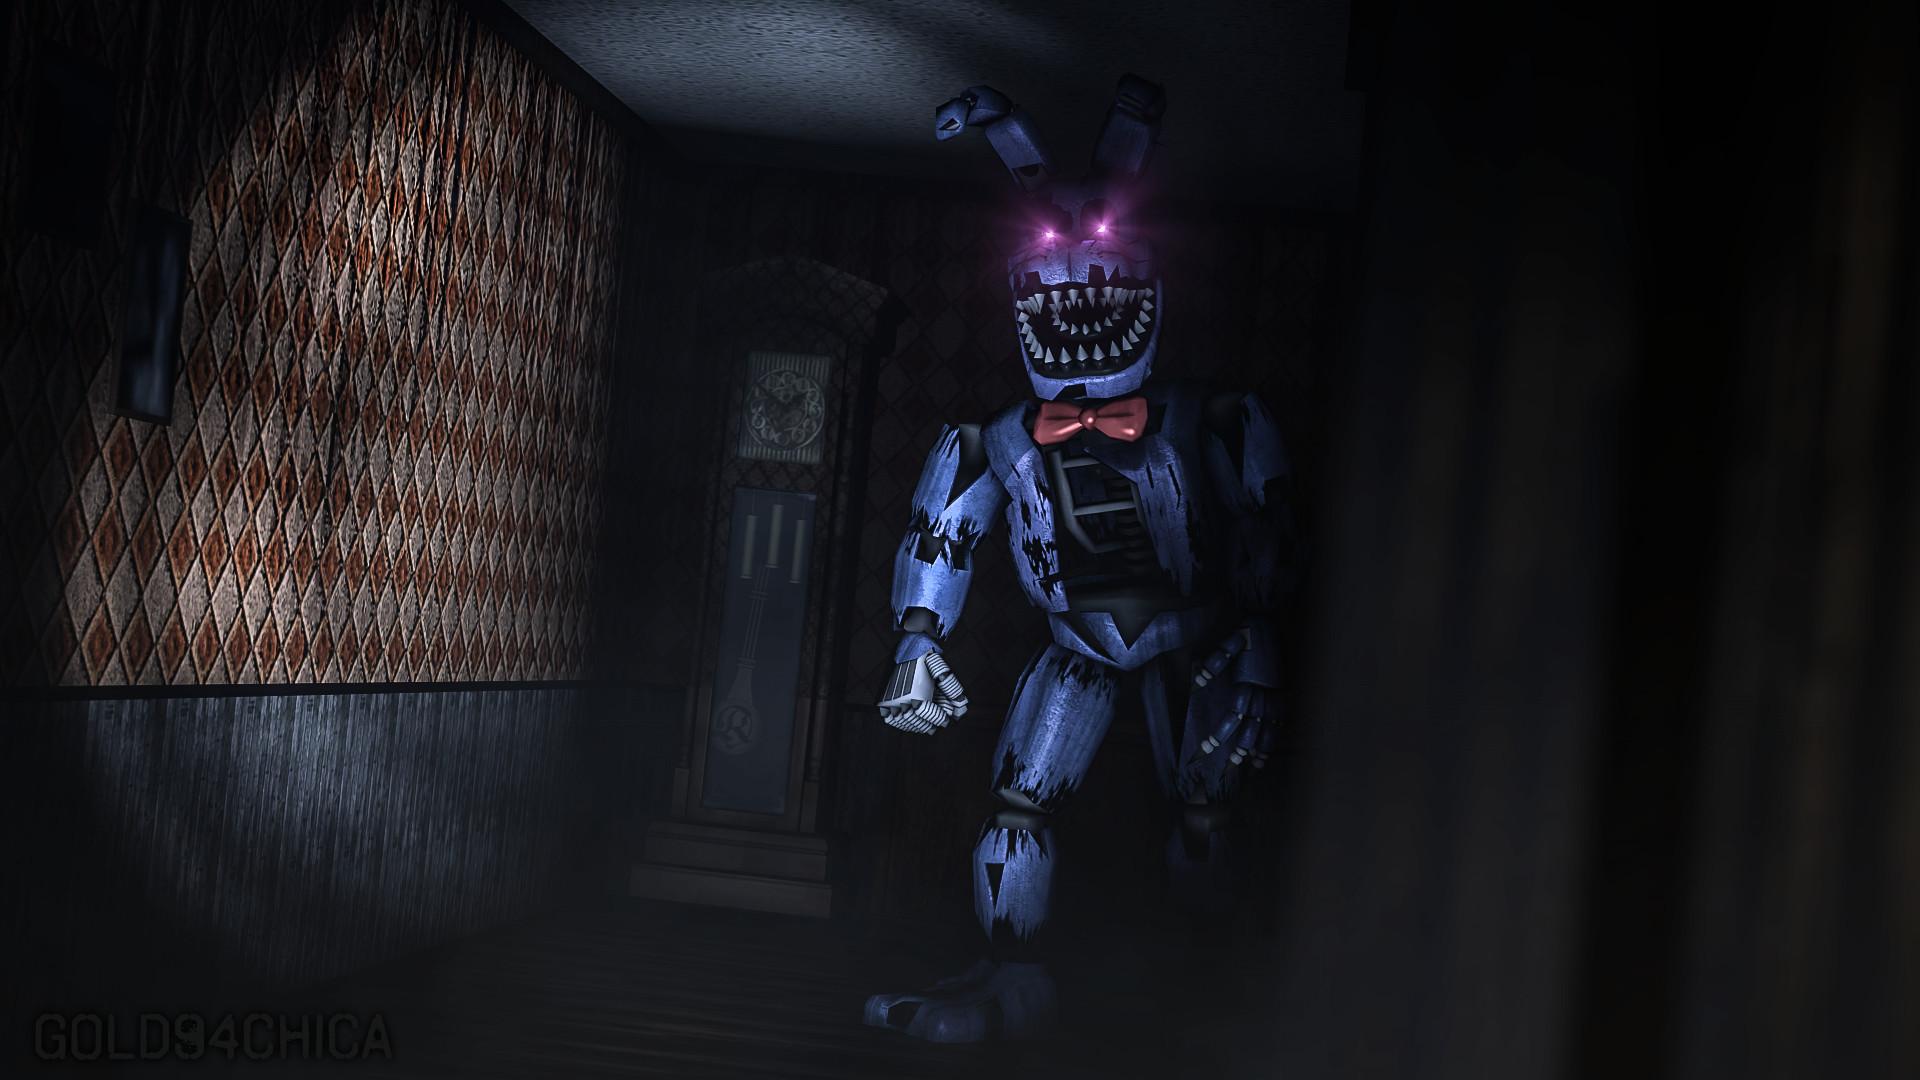 Five Nights At Freddy's 4 Nightmare Bonnie Wallpapers - Wallpaper Cave...